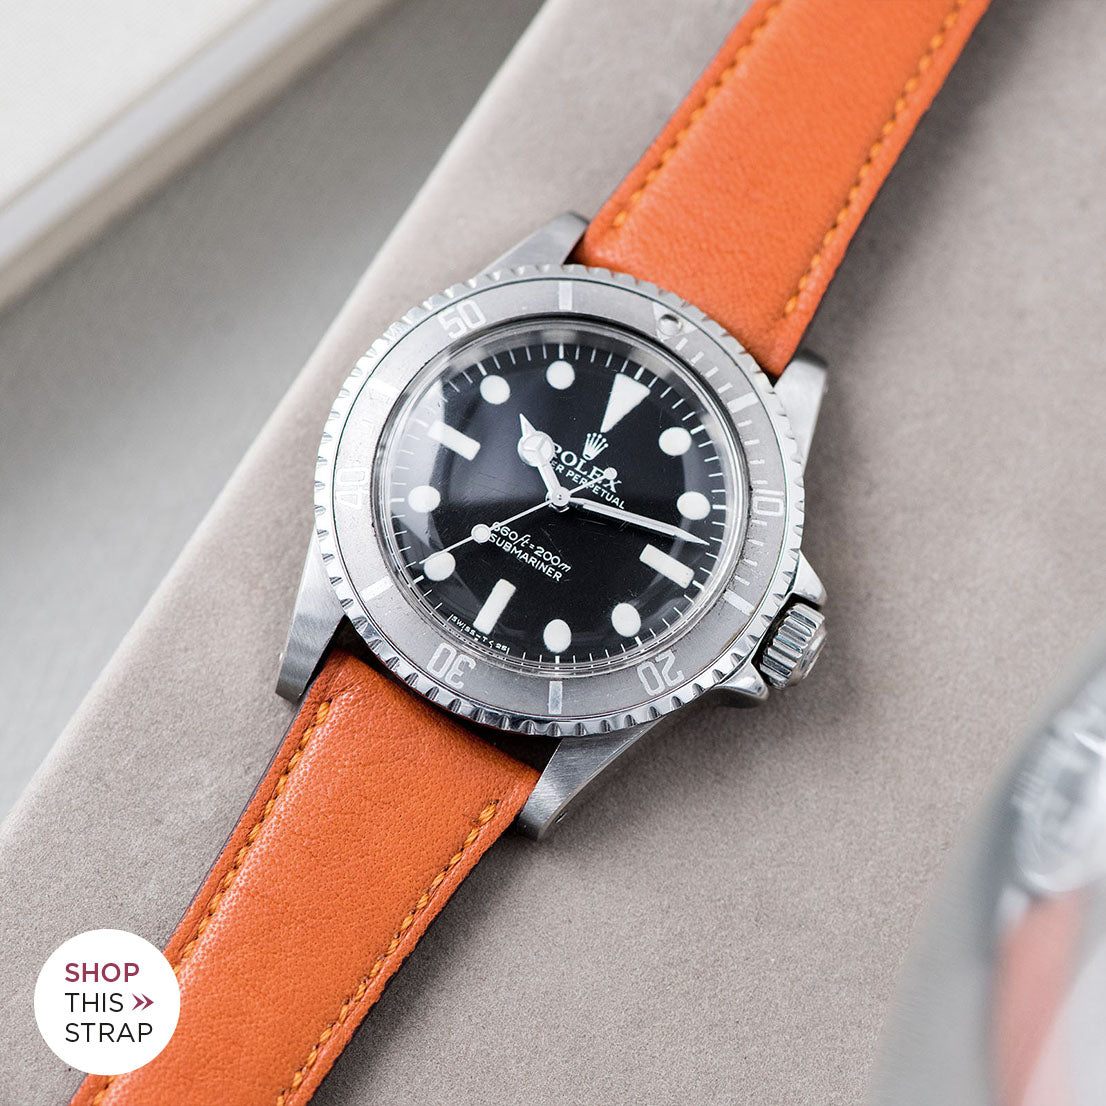 Bulang and Sons_Strap Guide_The Rolex 5513 Faded Maxi Submariner_City Orange Leather Watch Strap